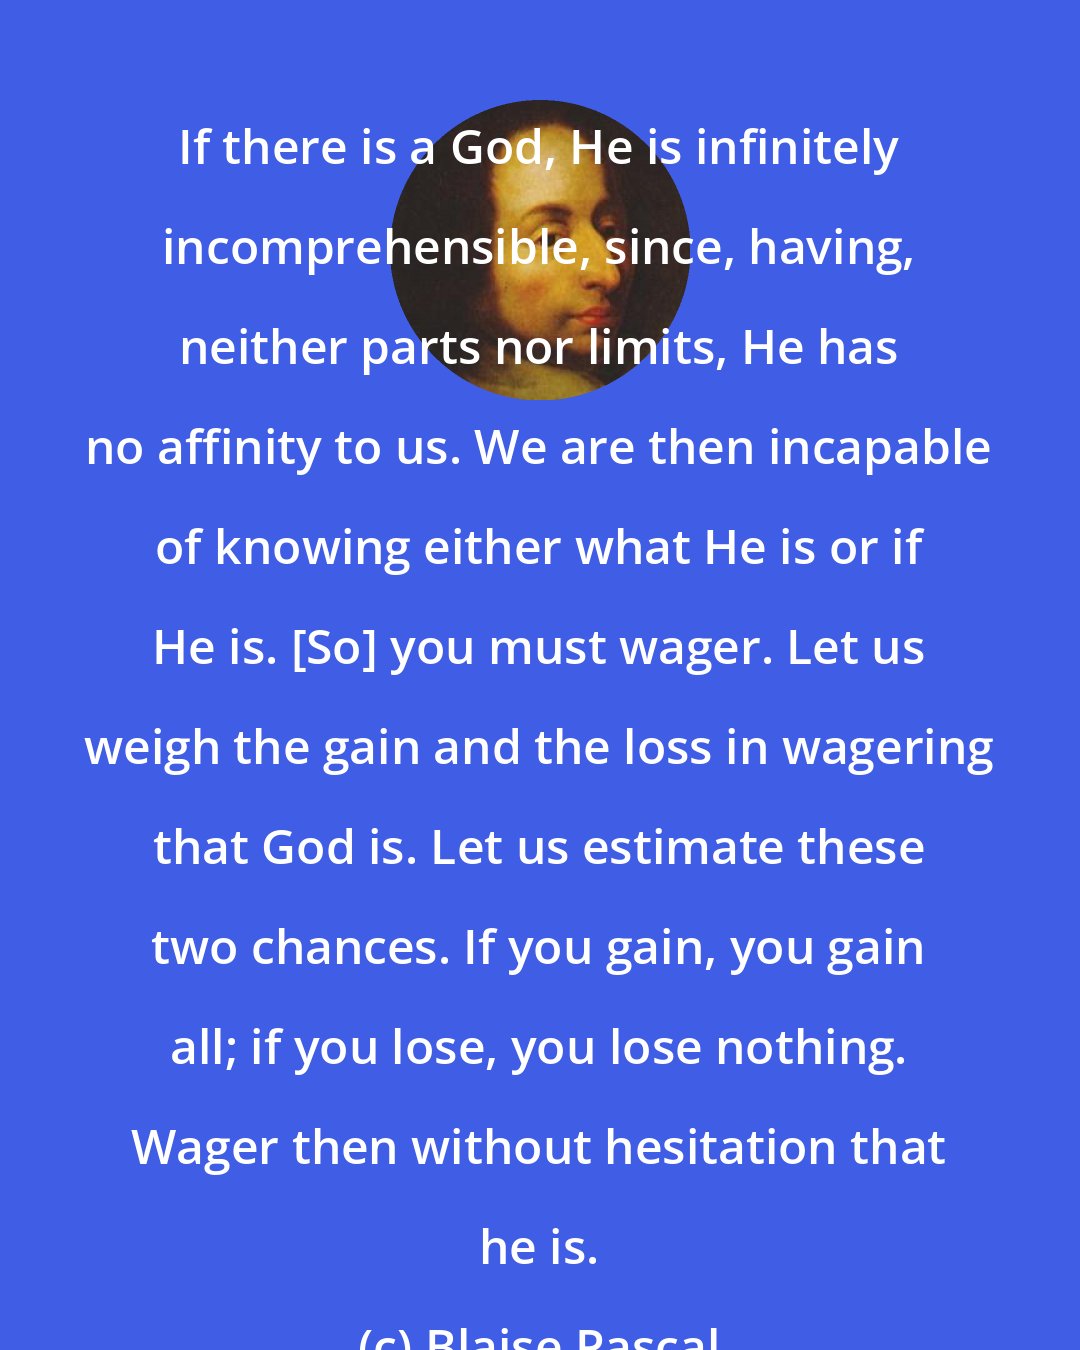 Blaise Pascal: If there is a God, He is infinitely incomprehensible, since, having, neither parts nor limits, He has no affinity to us. We are then incapable of knowing either what He is or if He is. [So] you must wager. Let us weigh the gain and the loss in wagering that God is. Let us estimate these two chances. If you gain, you gain all; if you lose, you lose nothing. Wager then without hesitation that he is.